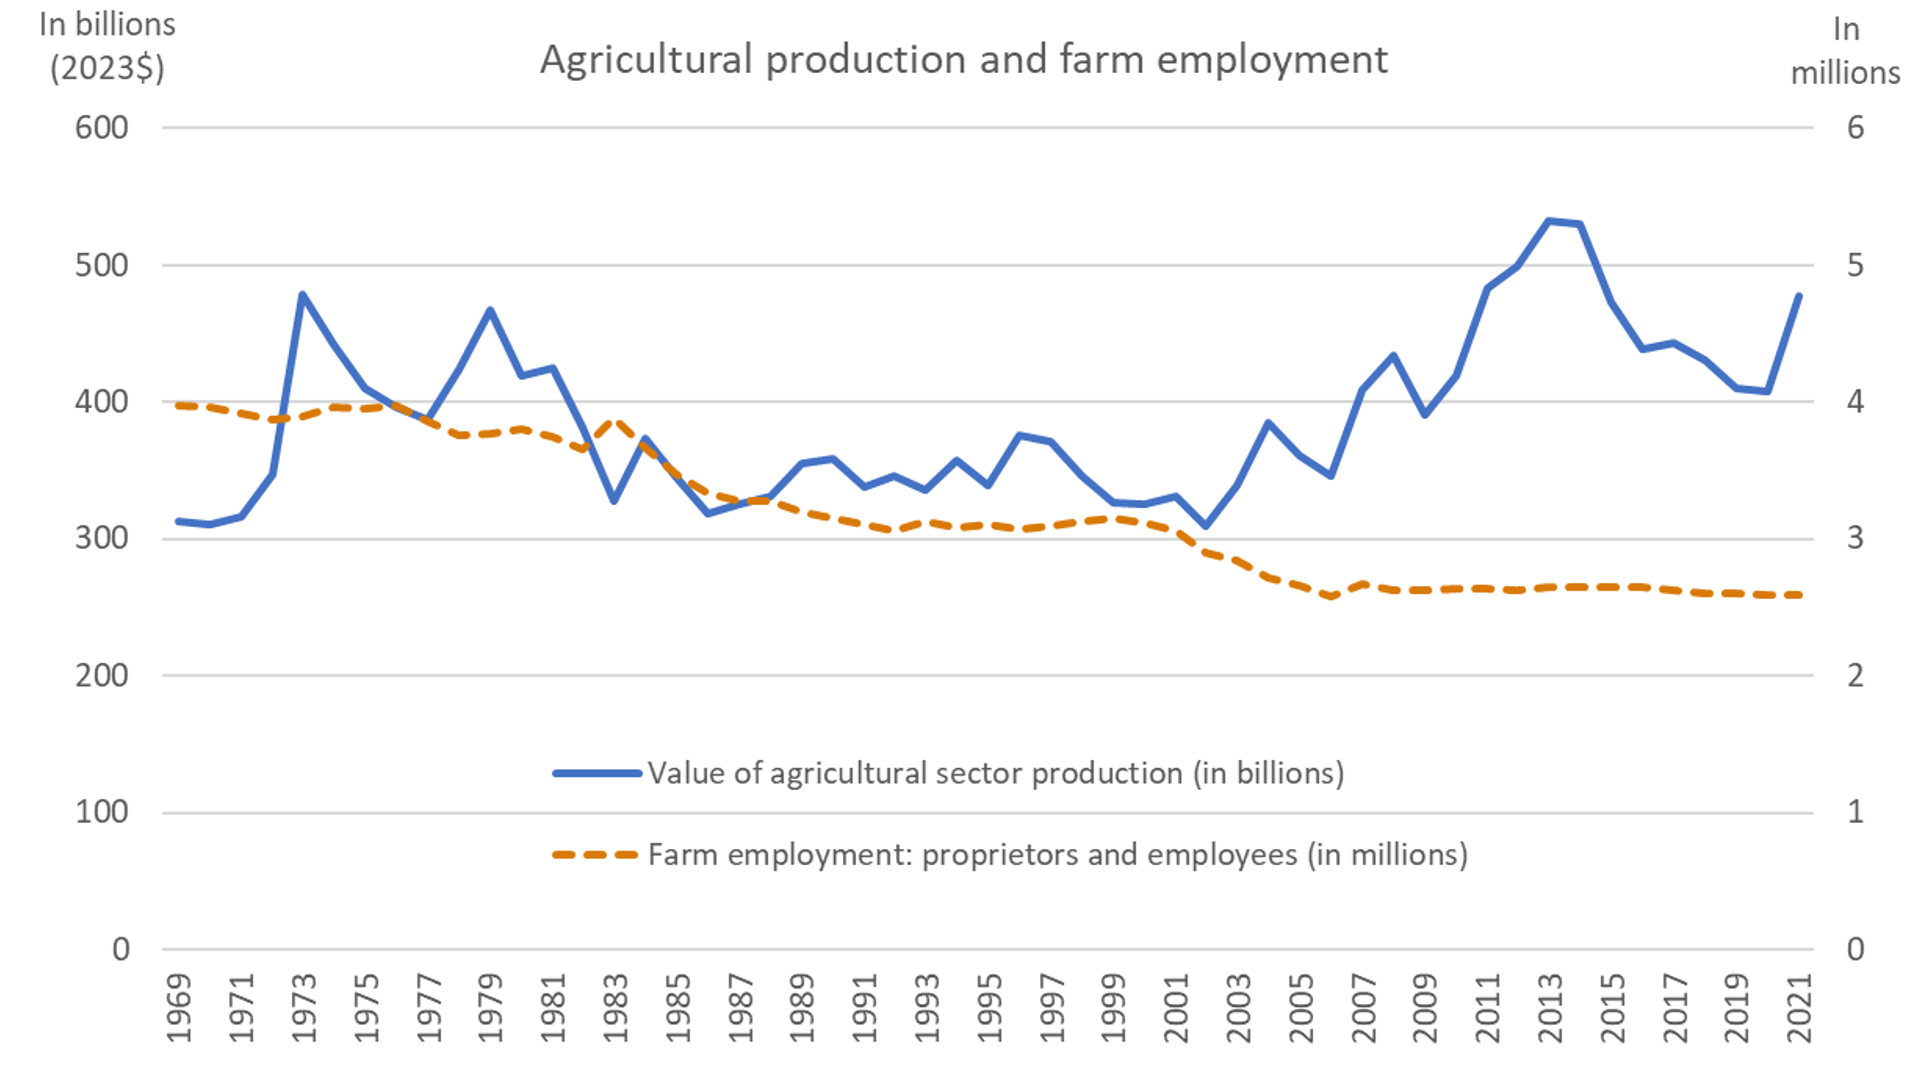 Figure 1. Agricultural production and farm employment, 1969-2021. See accessible link for data.